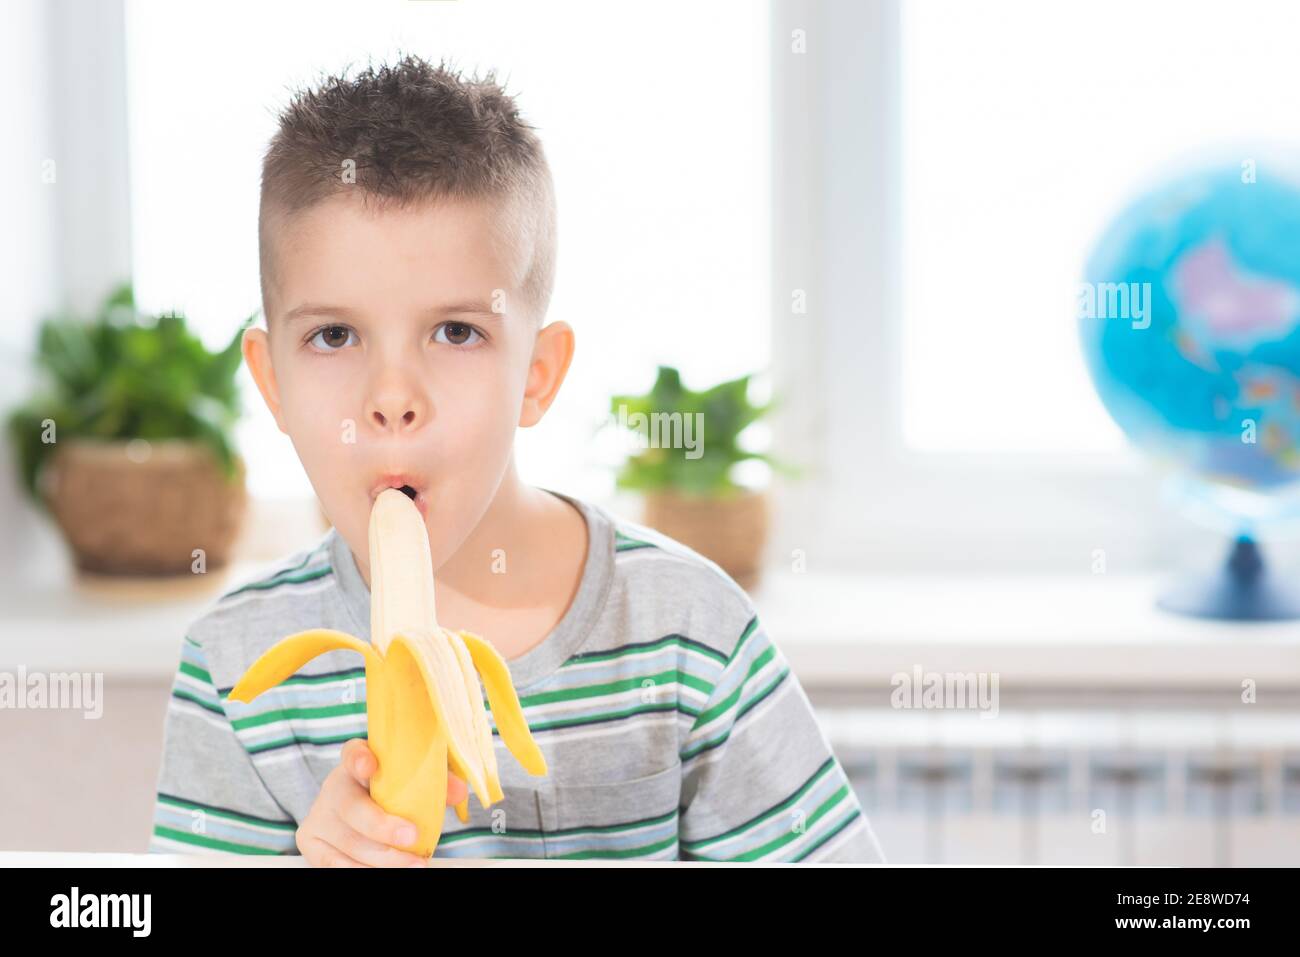 Handsome child eating banana in his room Stock Photo